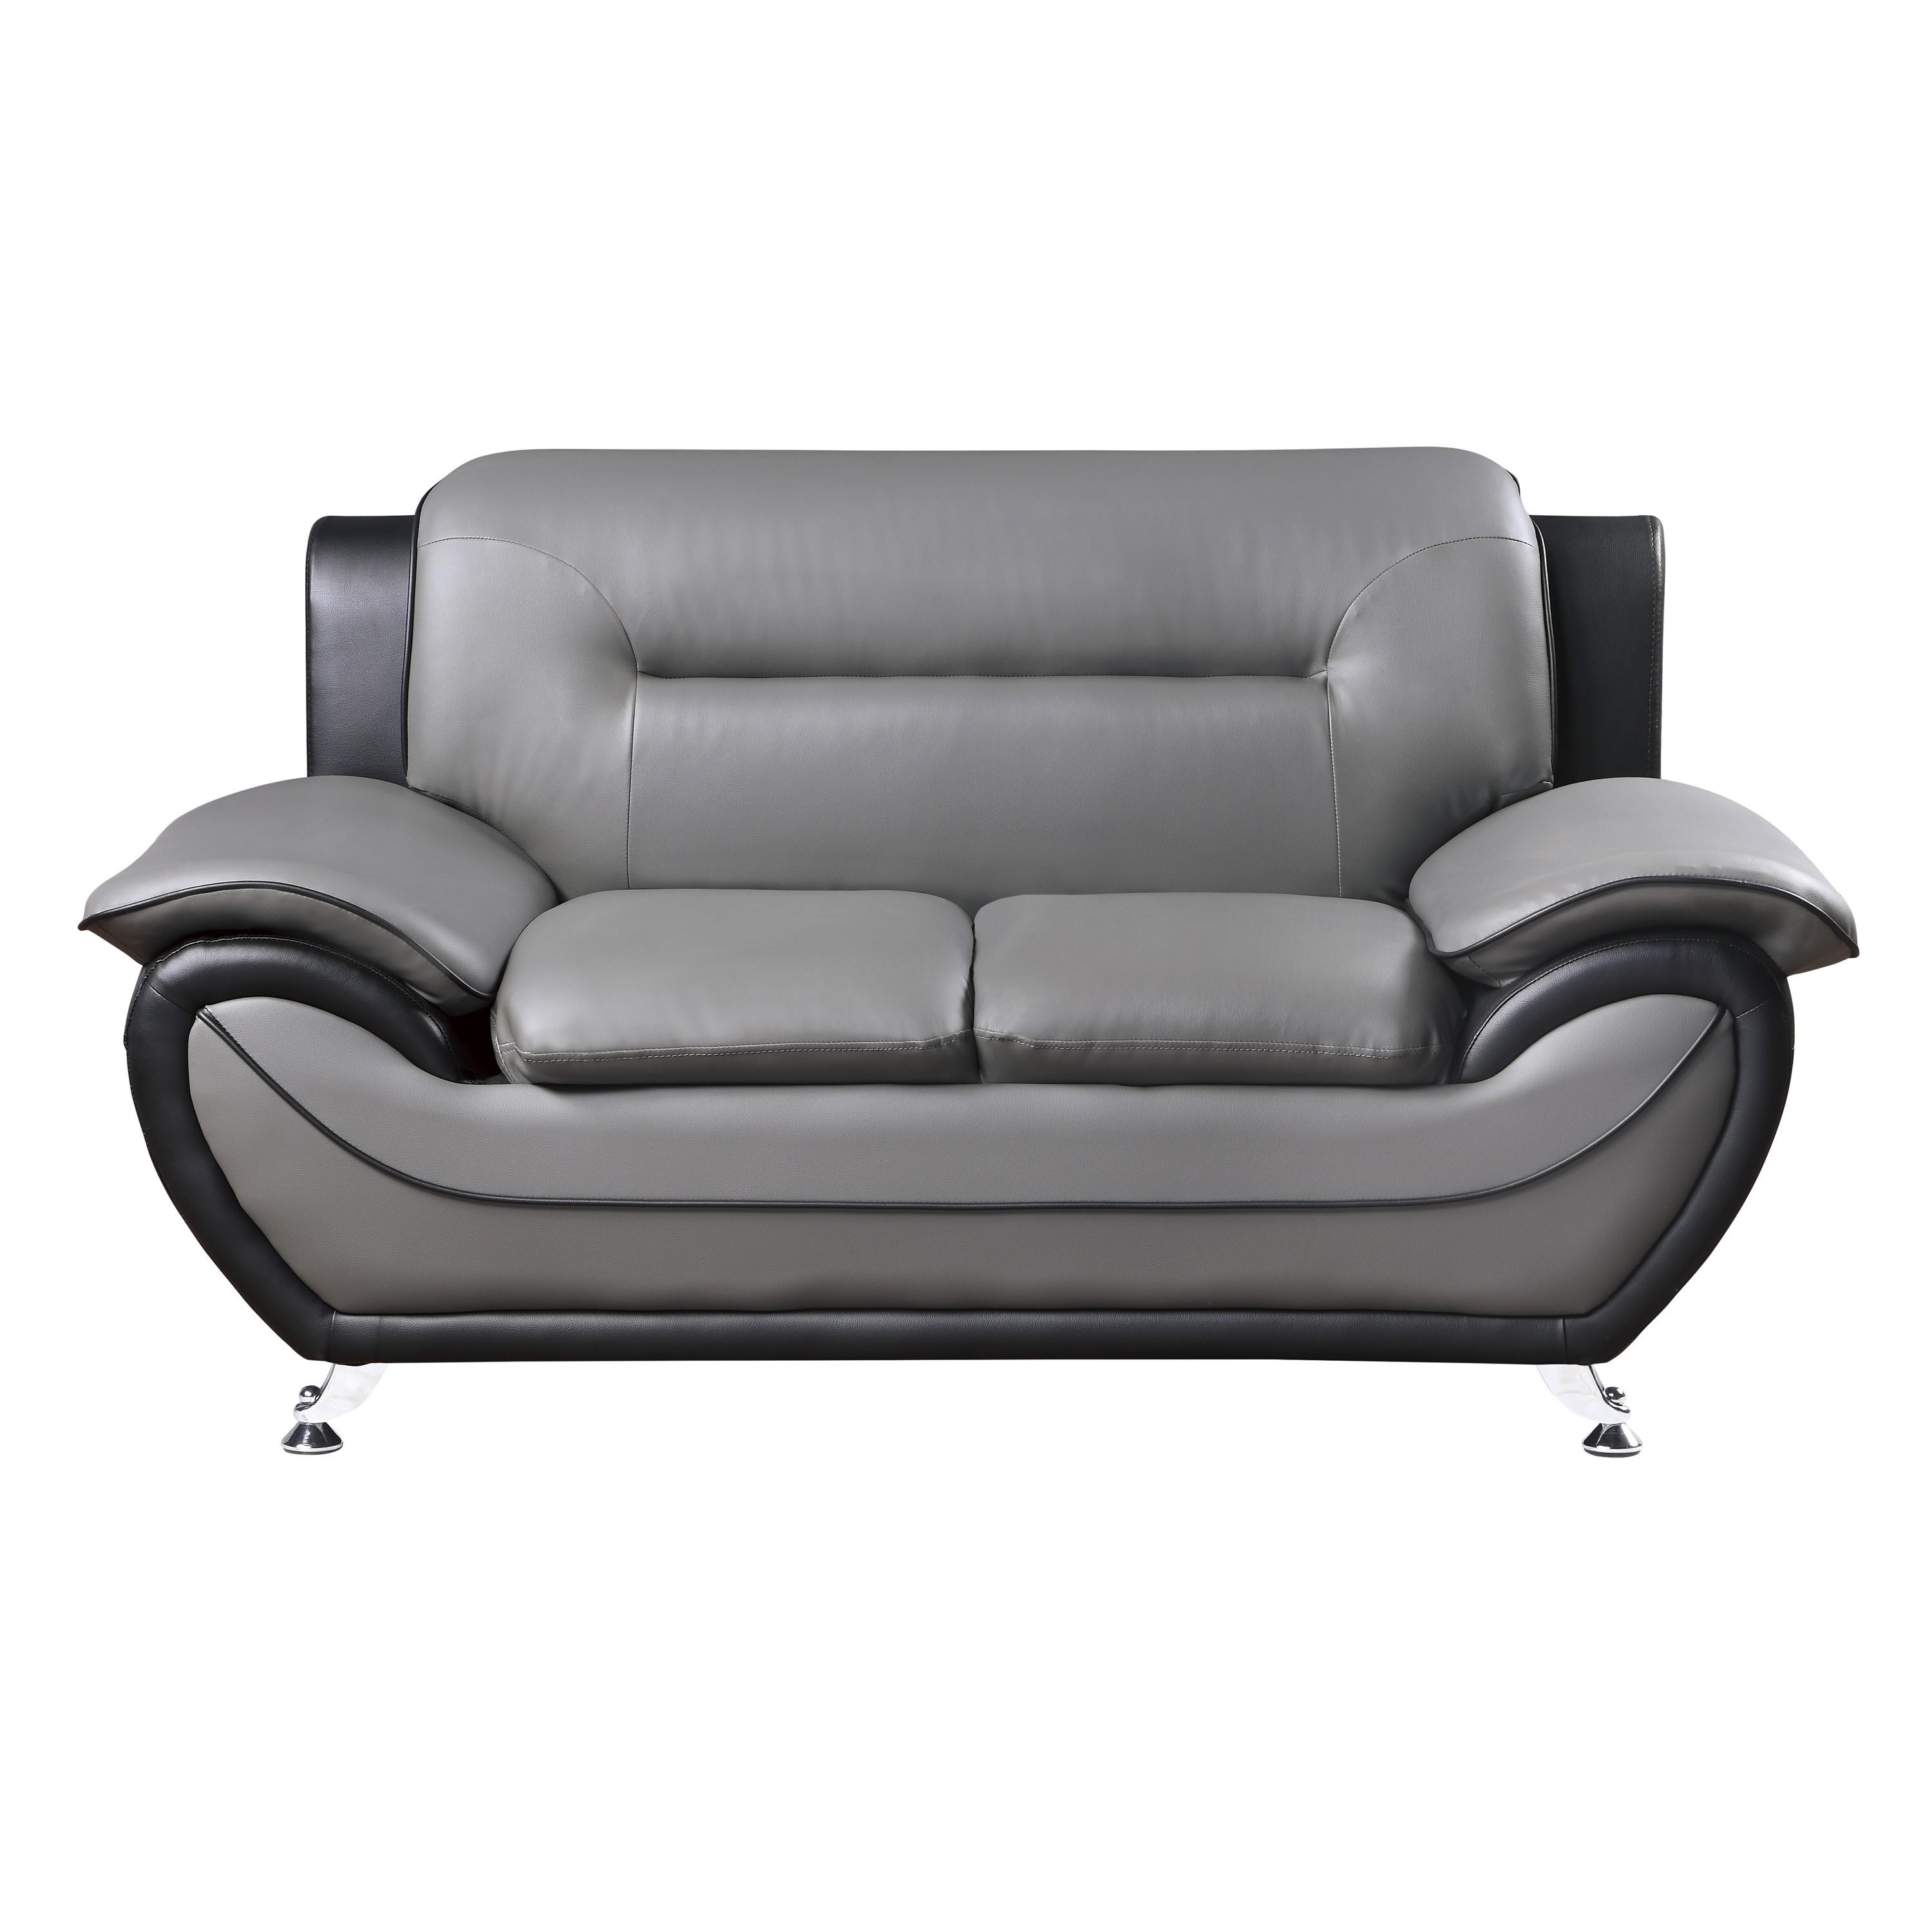 

    
Contemporary Gray Solid Wood Loveseat Homelegance 9419-2 Matteo
